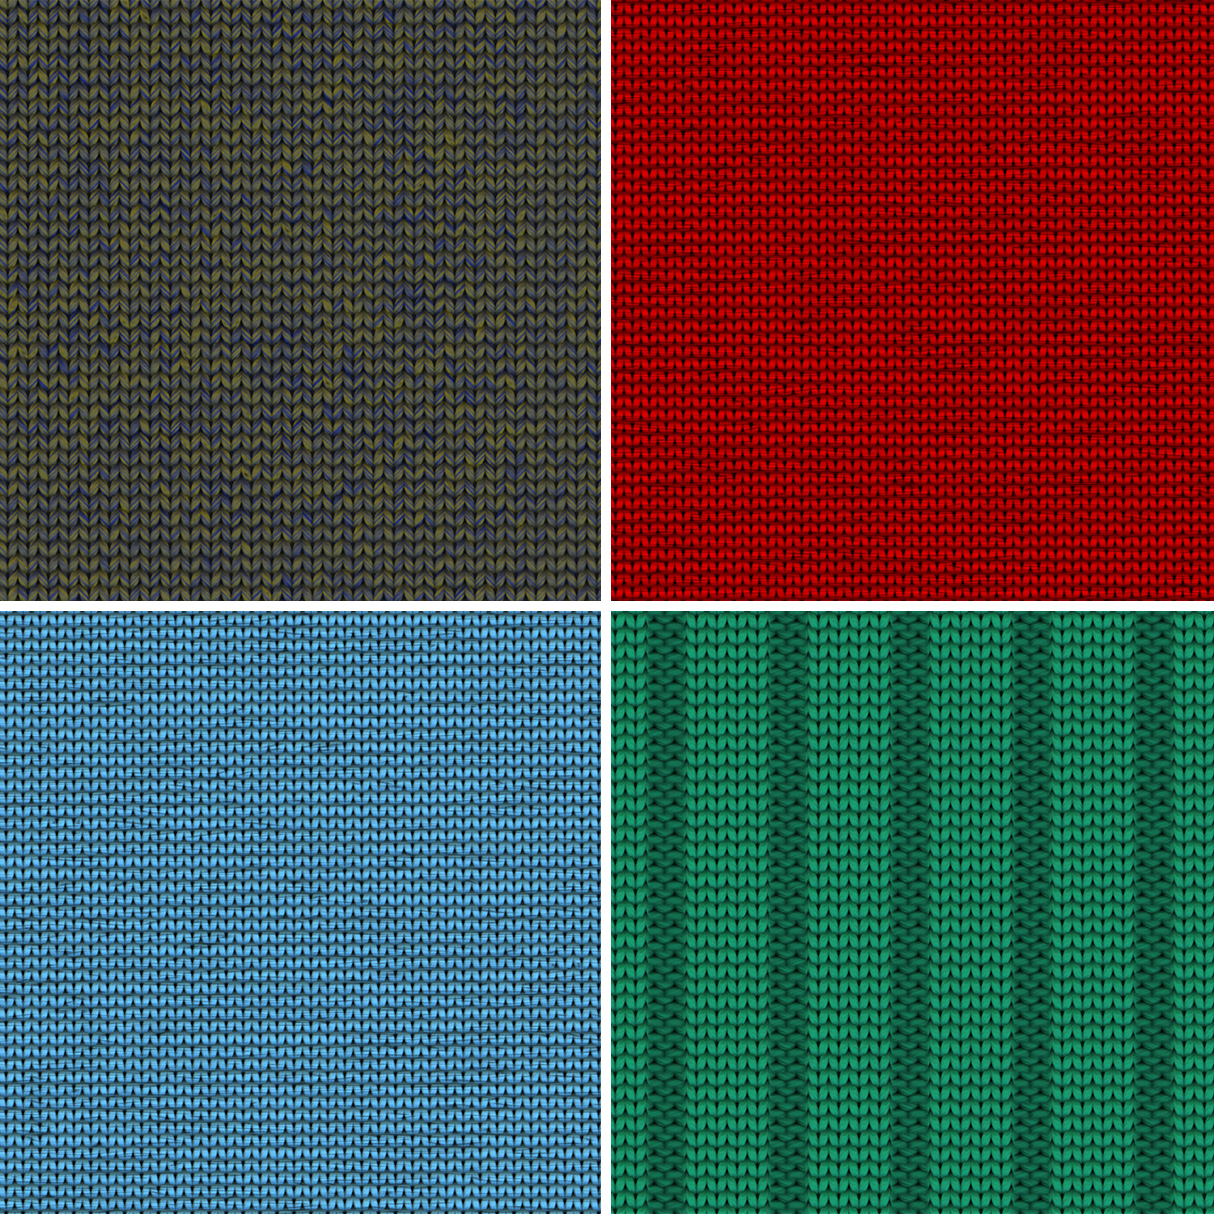 30 Knitted Background Textures Samples Preview – Part 7